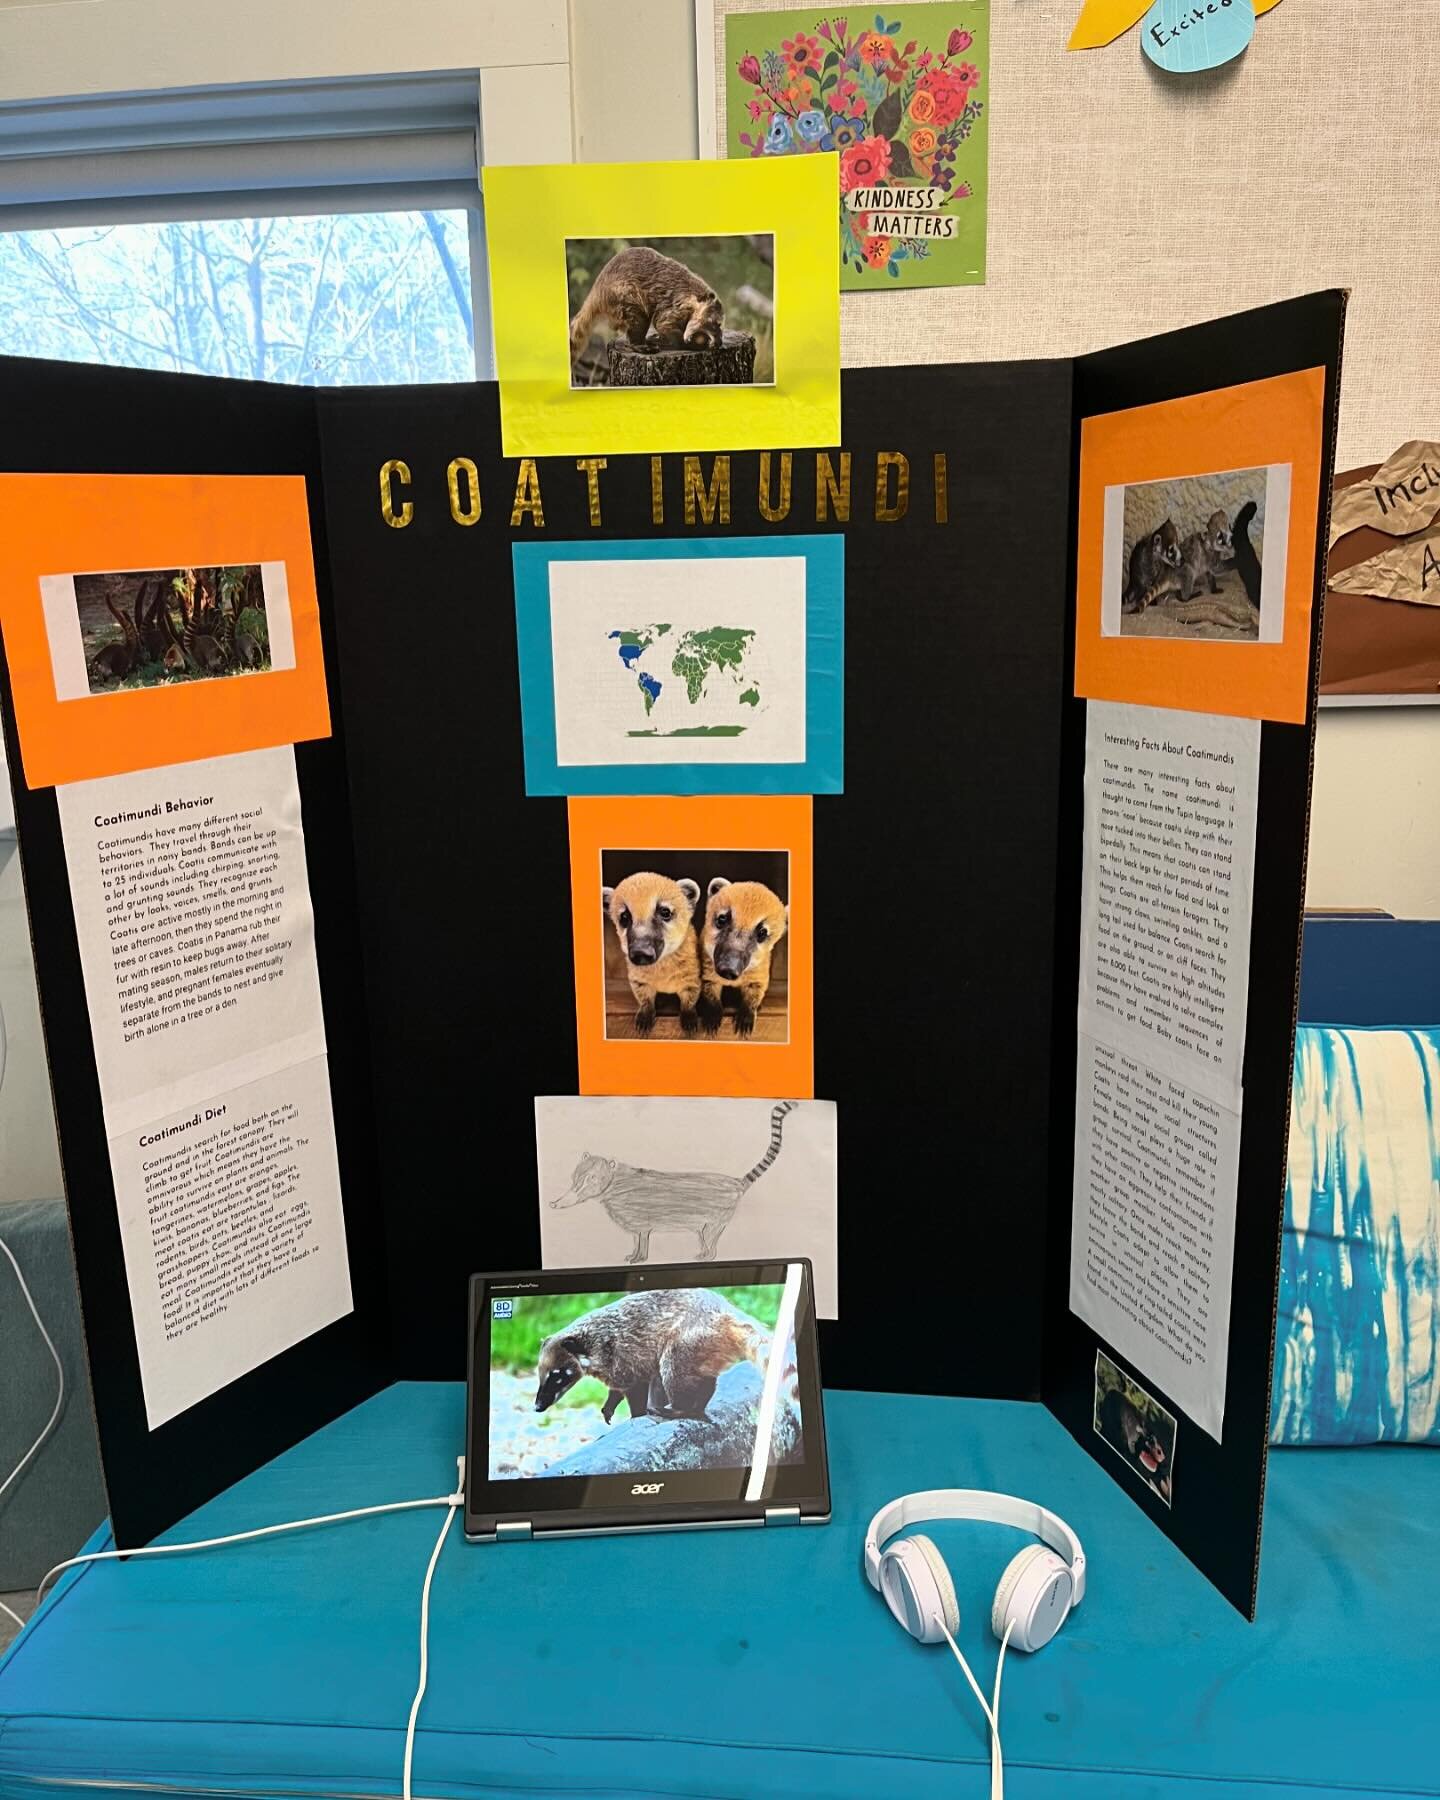 Scenes from our Elementary Two Maya Museum: What a gift to be able to learn from our oldest students. All of their hard work, research and tenacity paid off as caregivers, students and teachers from across the School benefited from this incredible pr